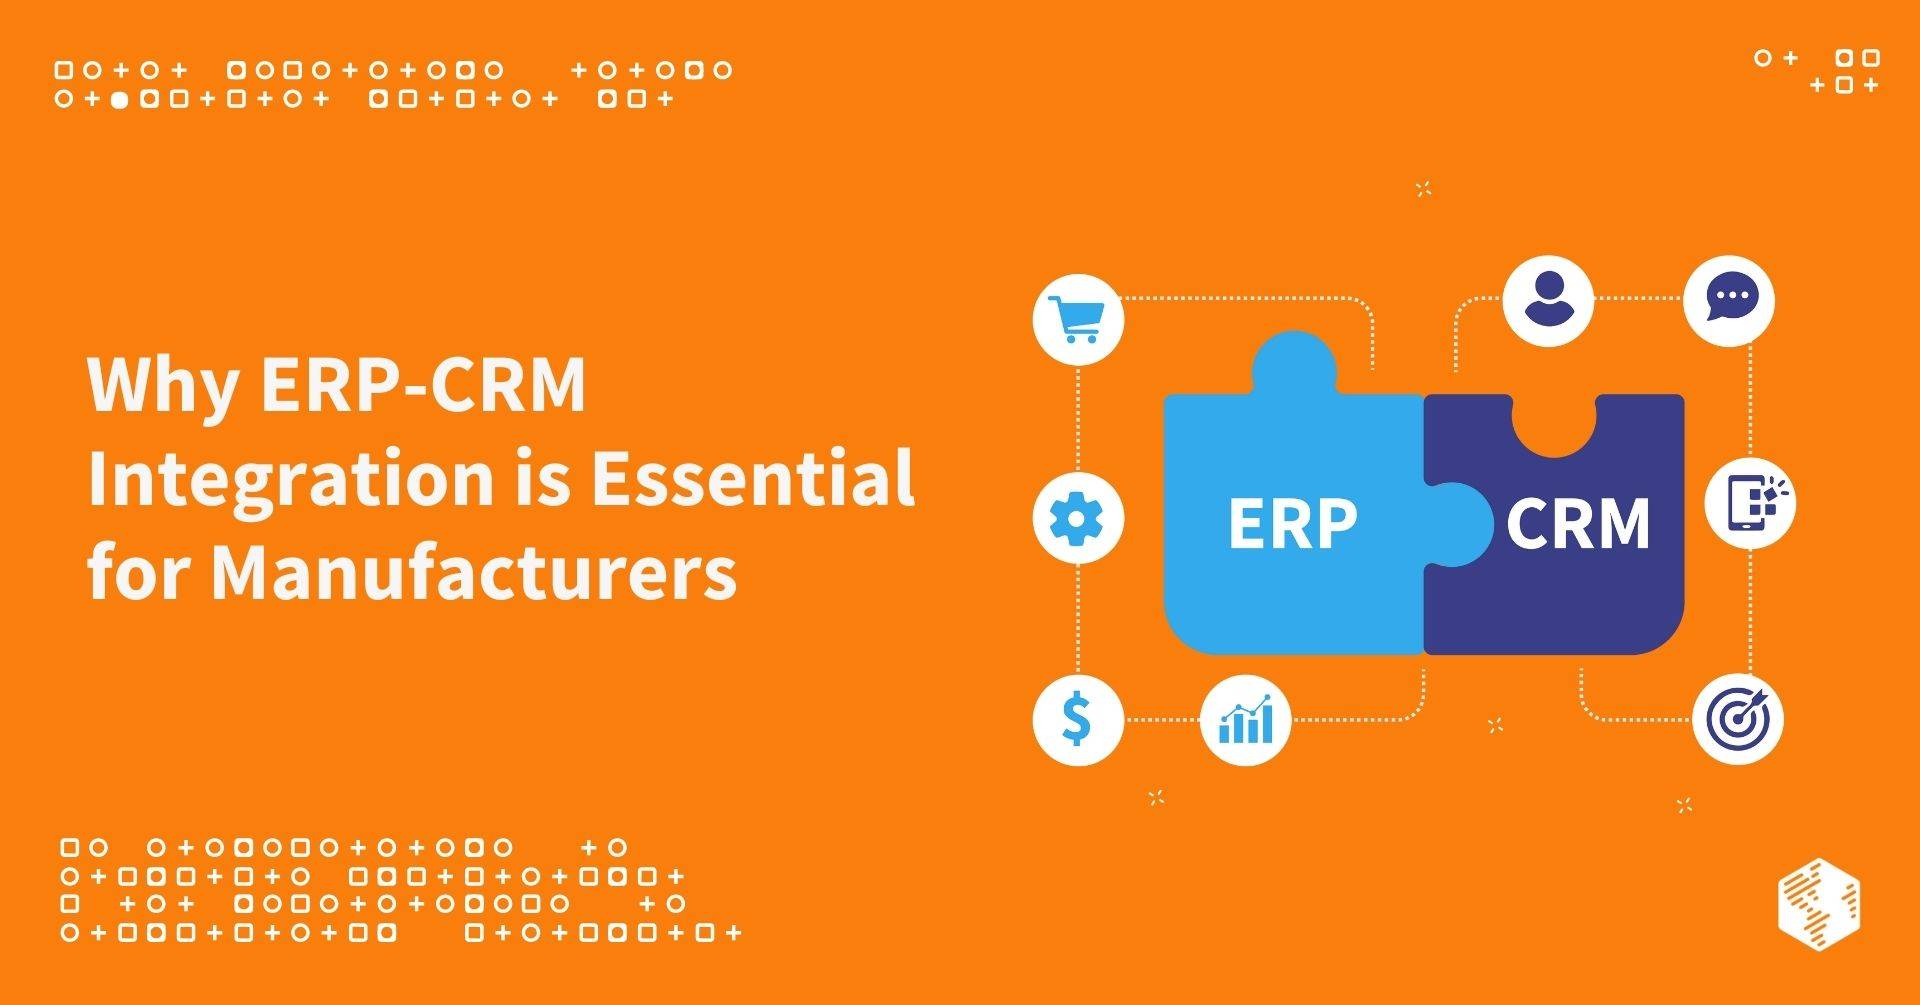 Why ERP-CRM Integration is Essential for Manufacturers